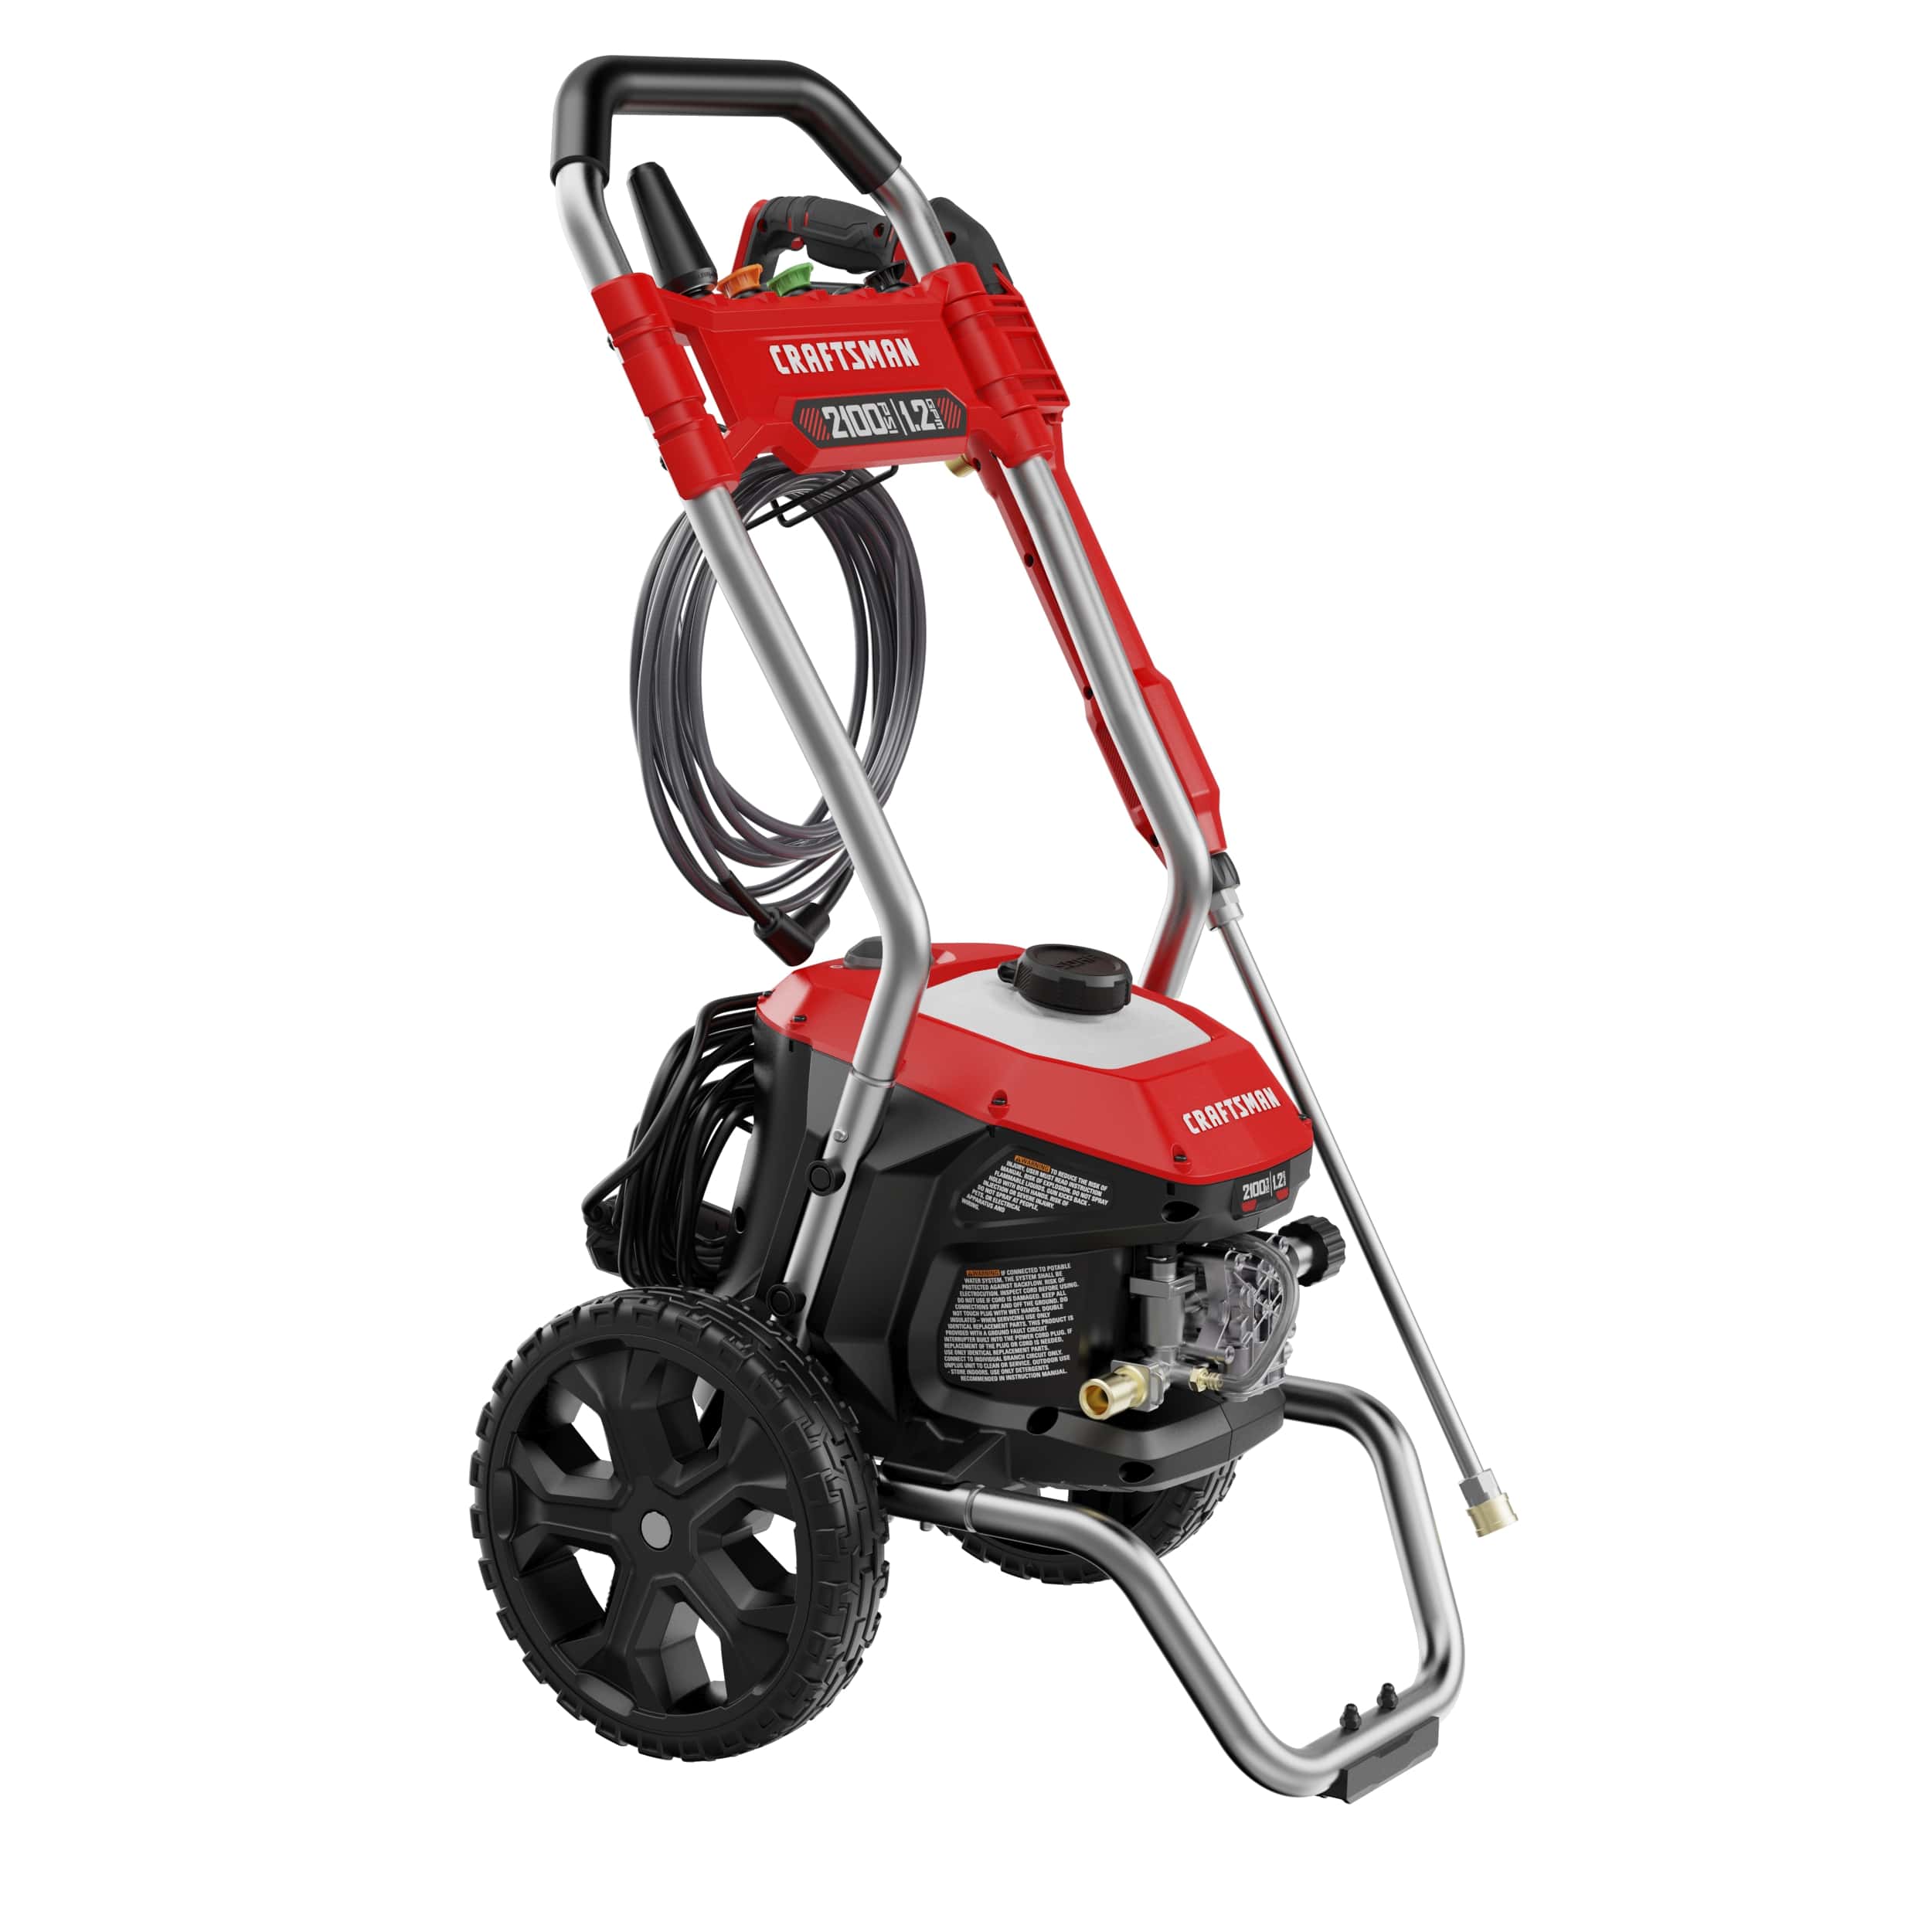 CRAFTSMAN 2100 PSI 1.2-Gallon-GPM Cold Water Electric 